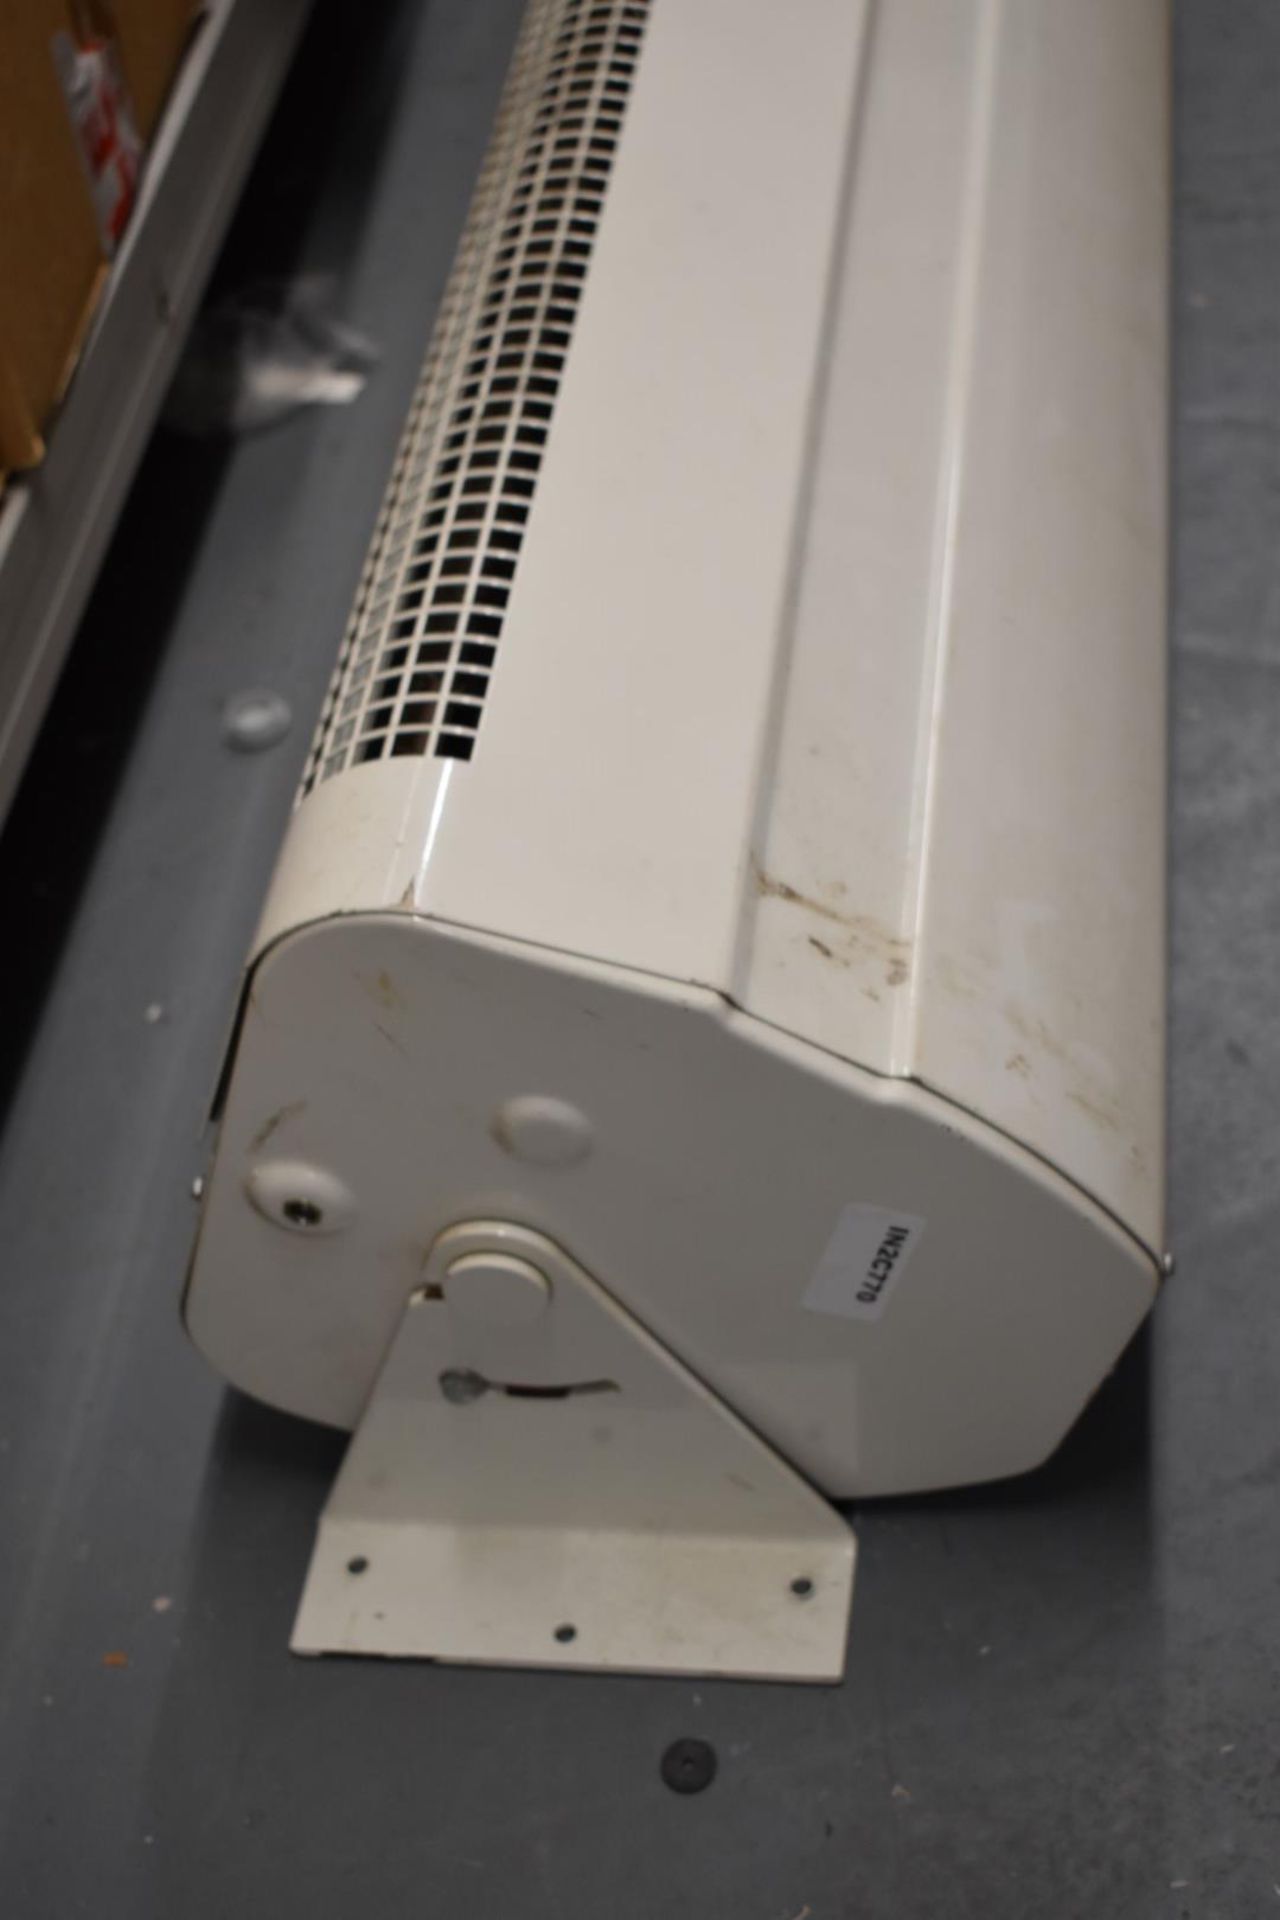 1 x Dimplex HAC60 Wall Mounted 6000w Heater and Fan - 230v - Image 2 of 4